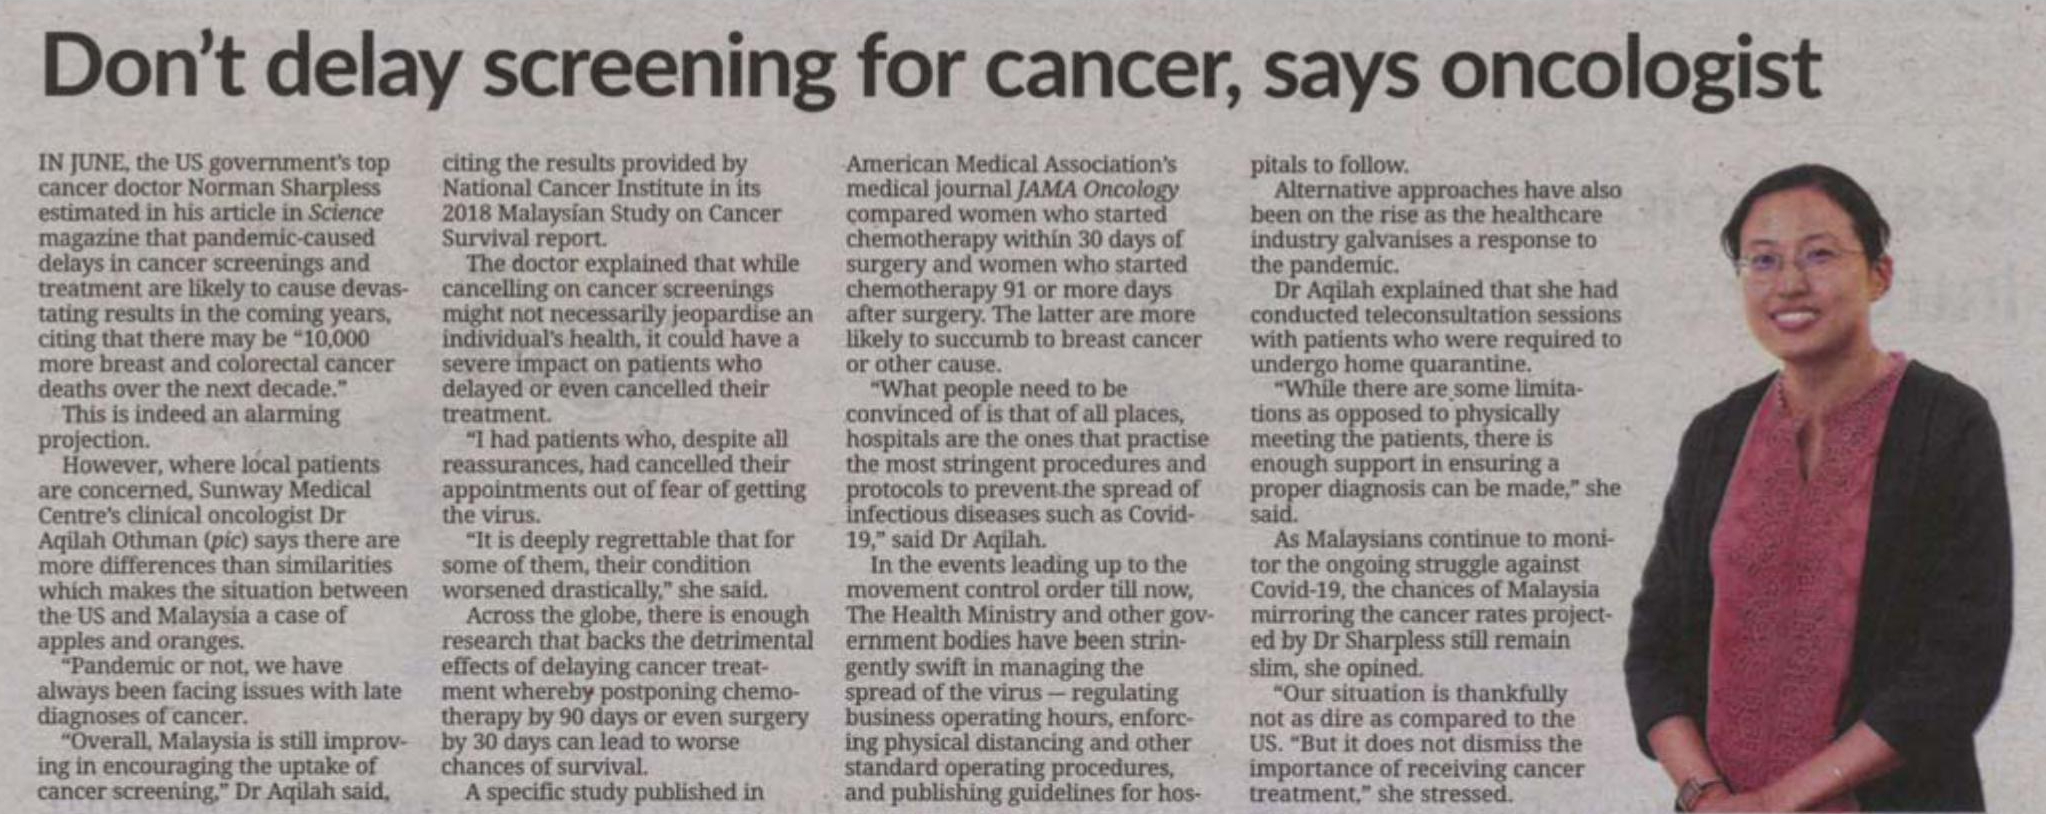 Don’t delay cancer screening